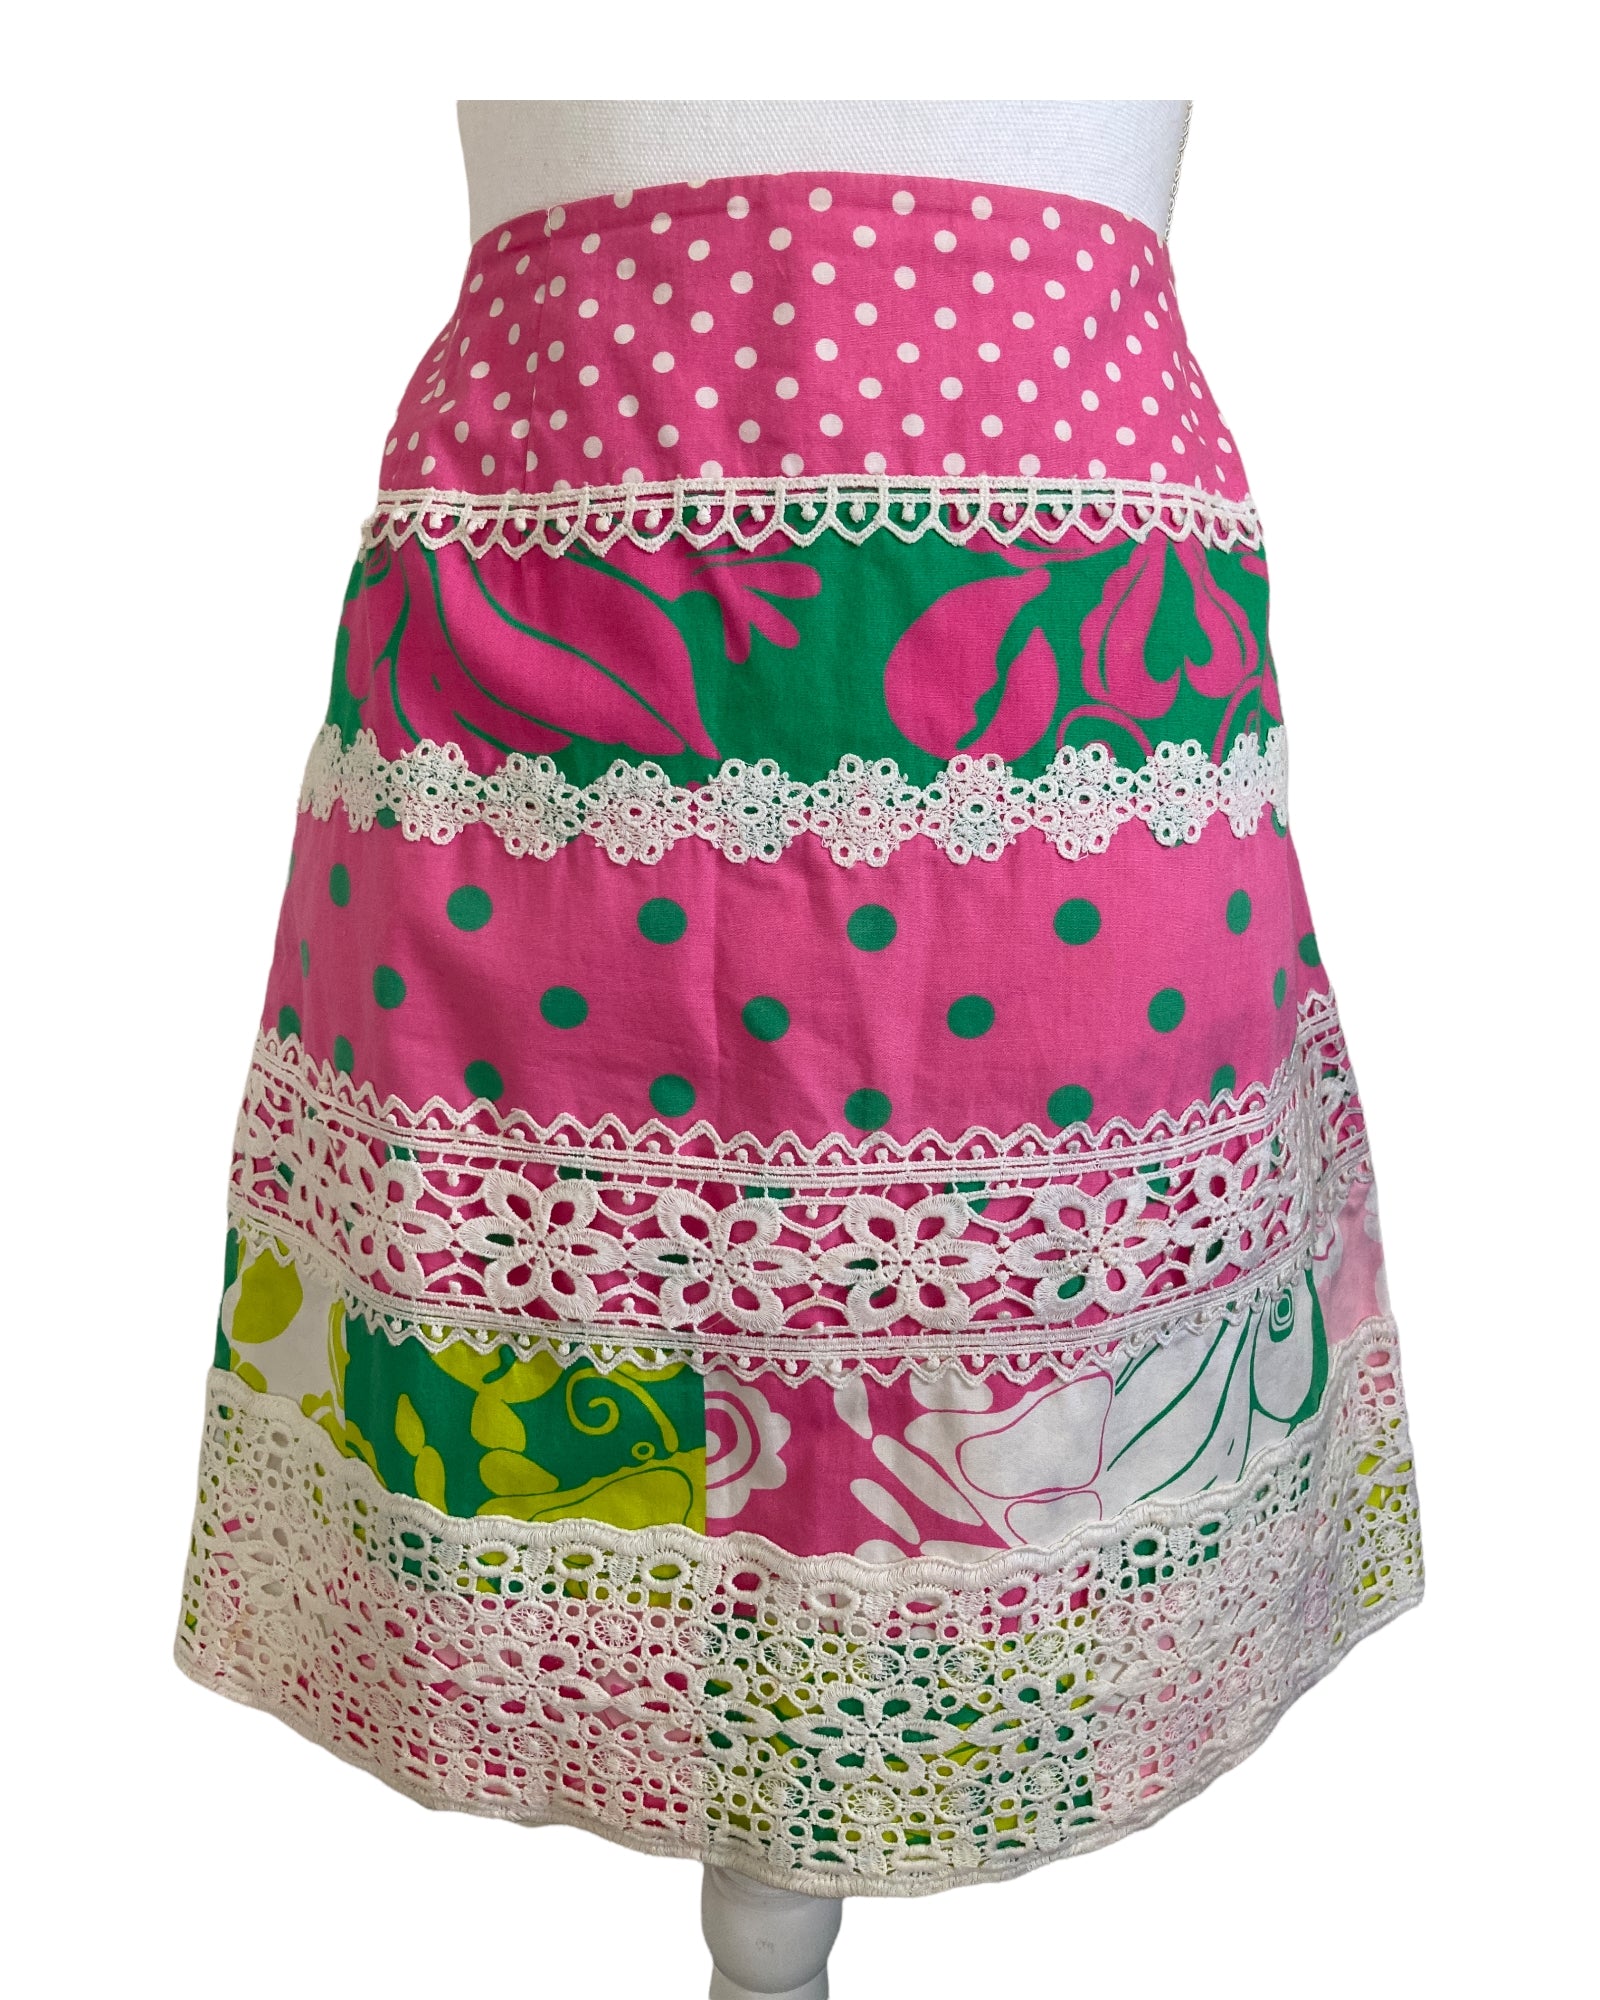 Lilly Pulitzer Vintage Skirt, 4